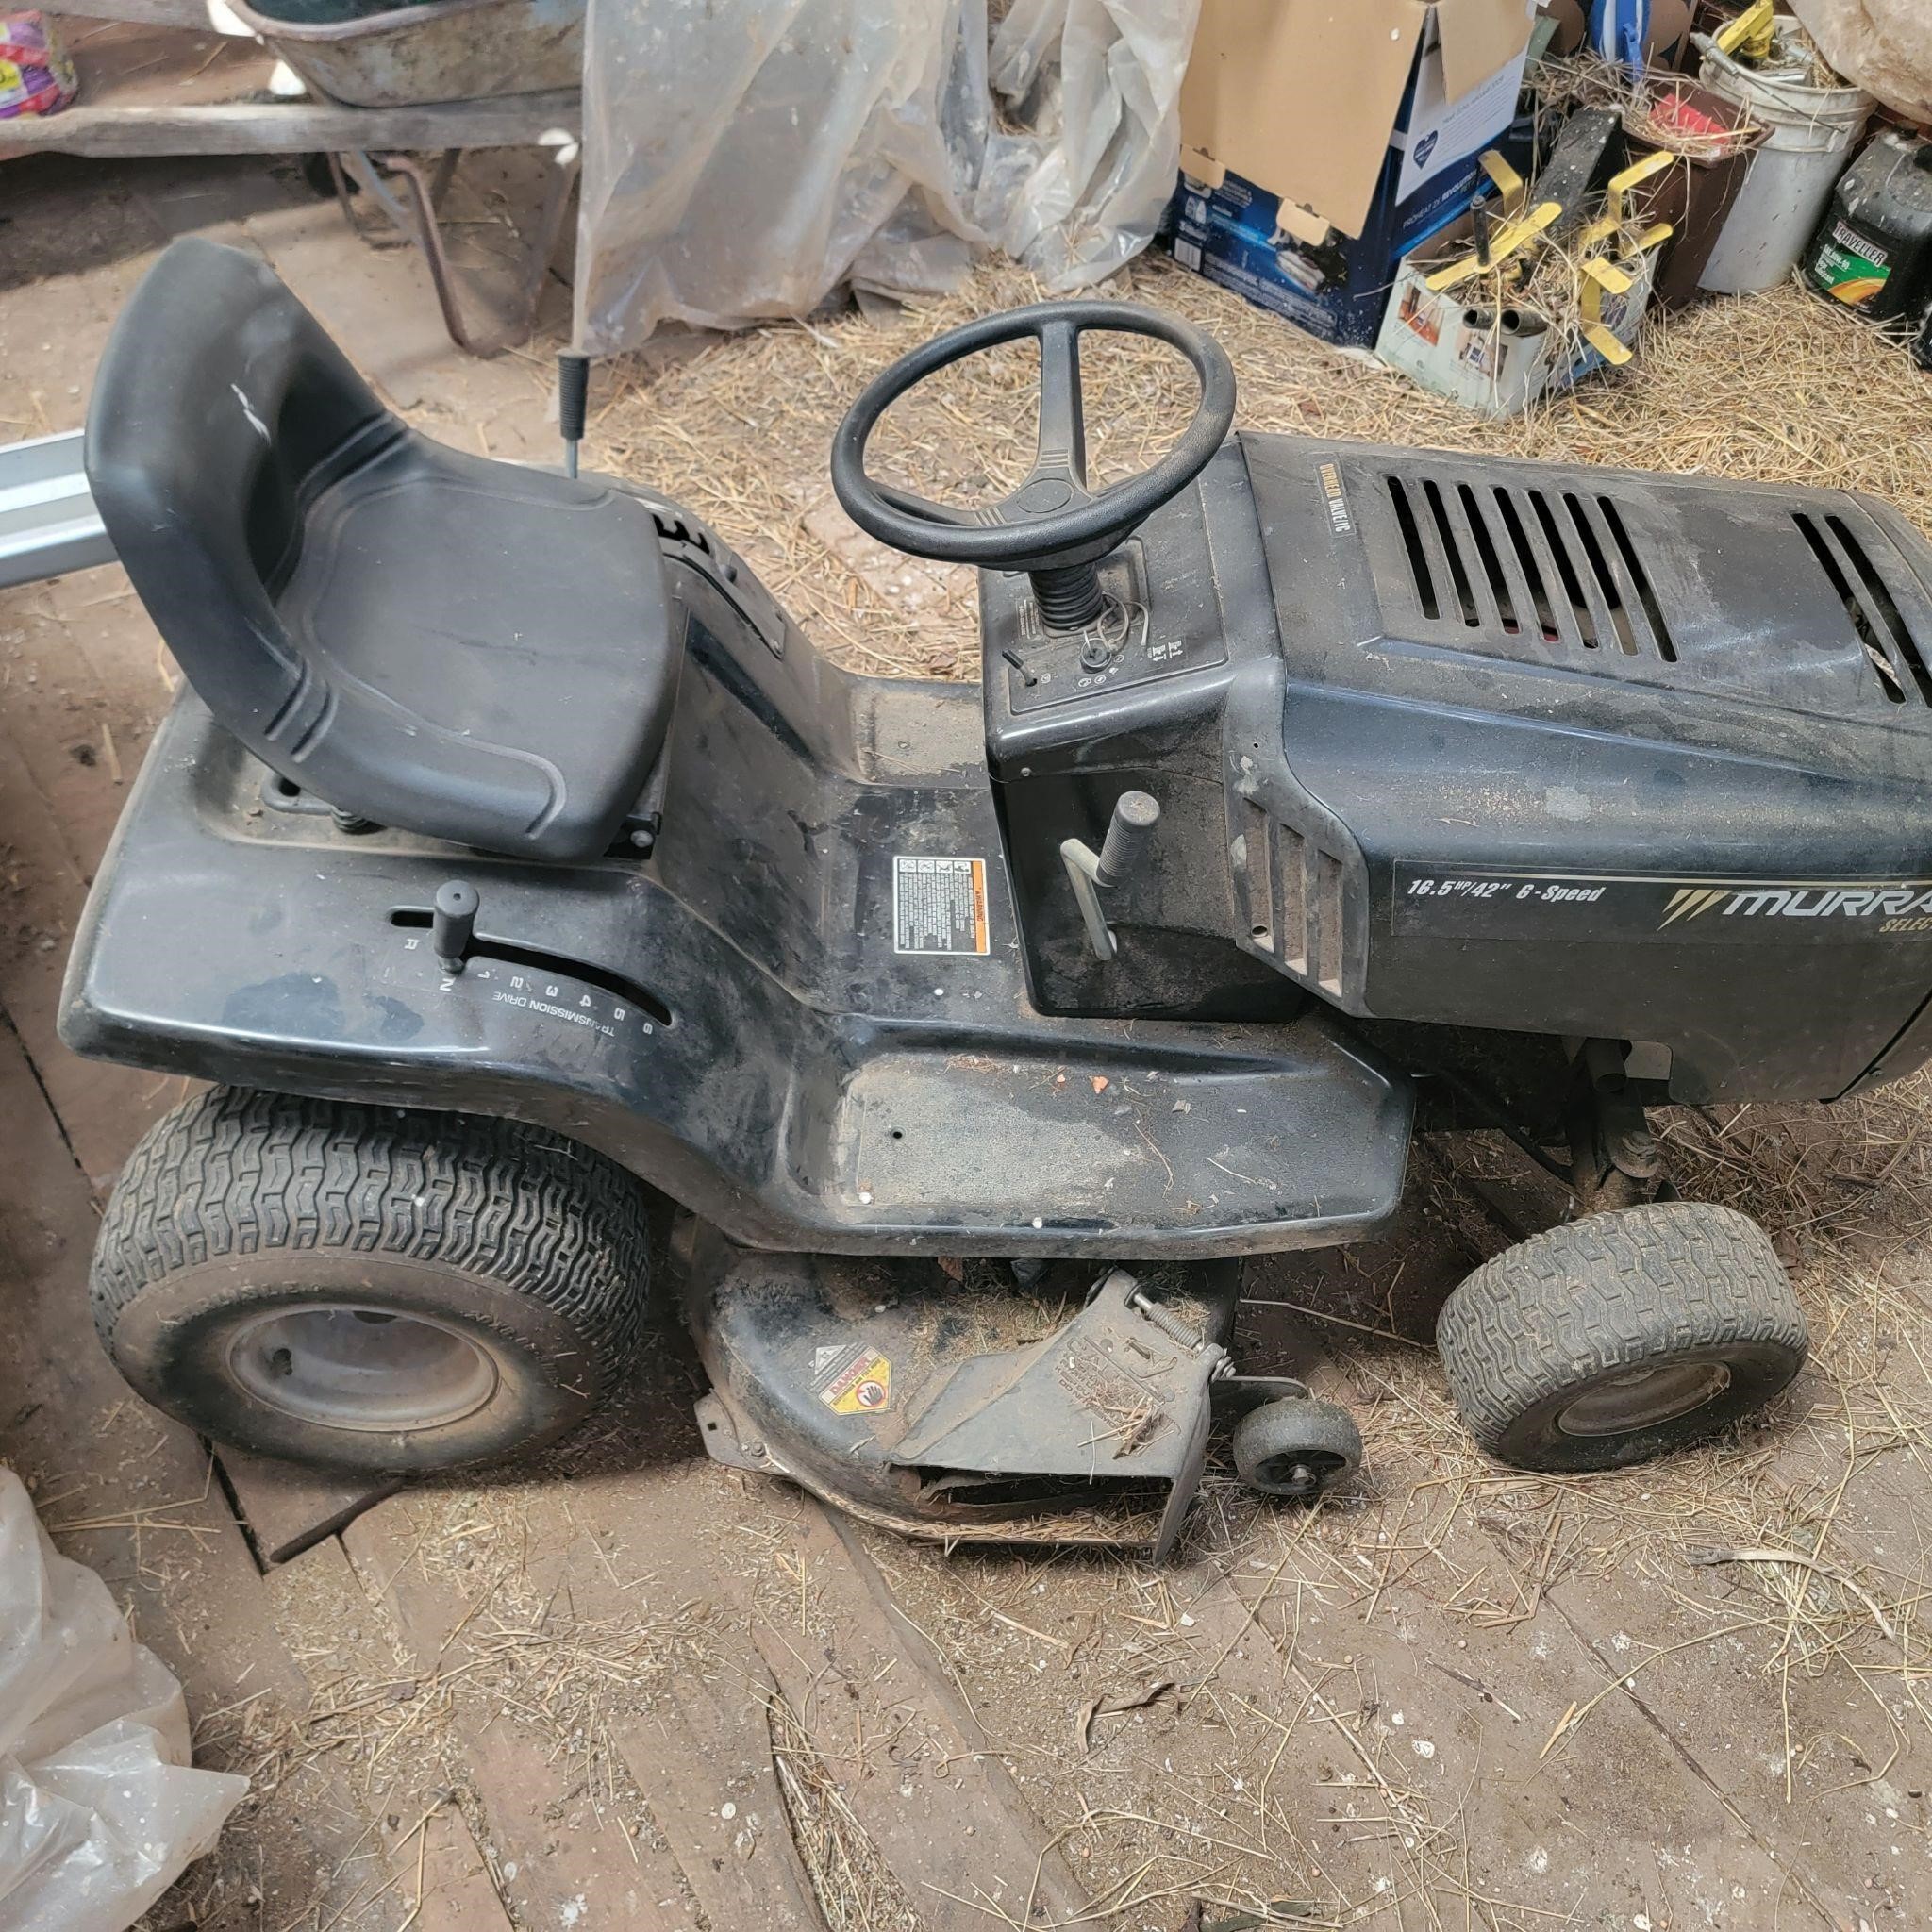 Murray Lawn Tractor- 42" 16.5HP